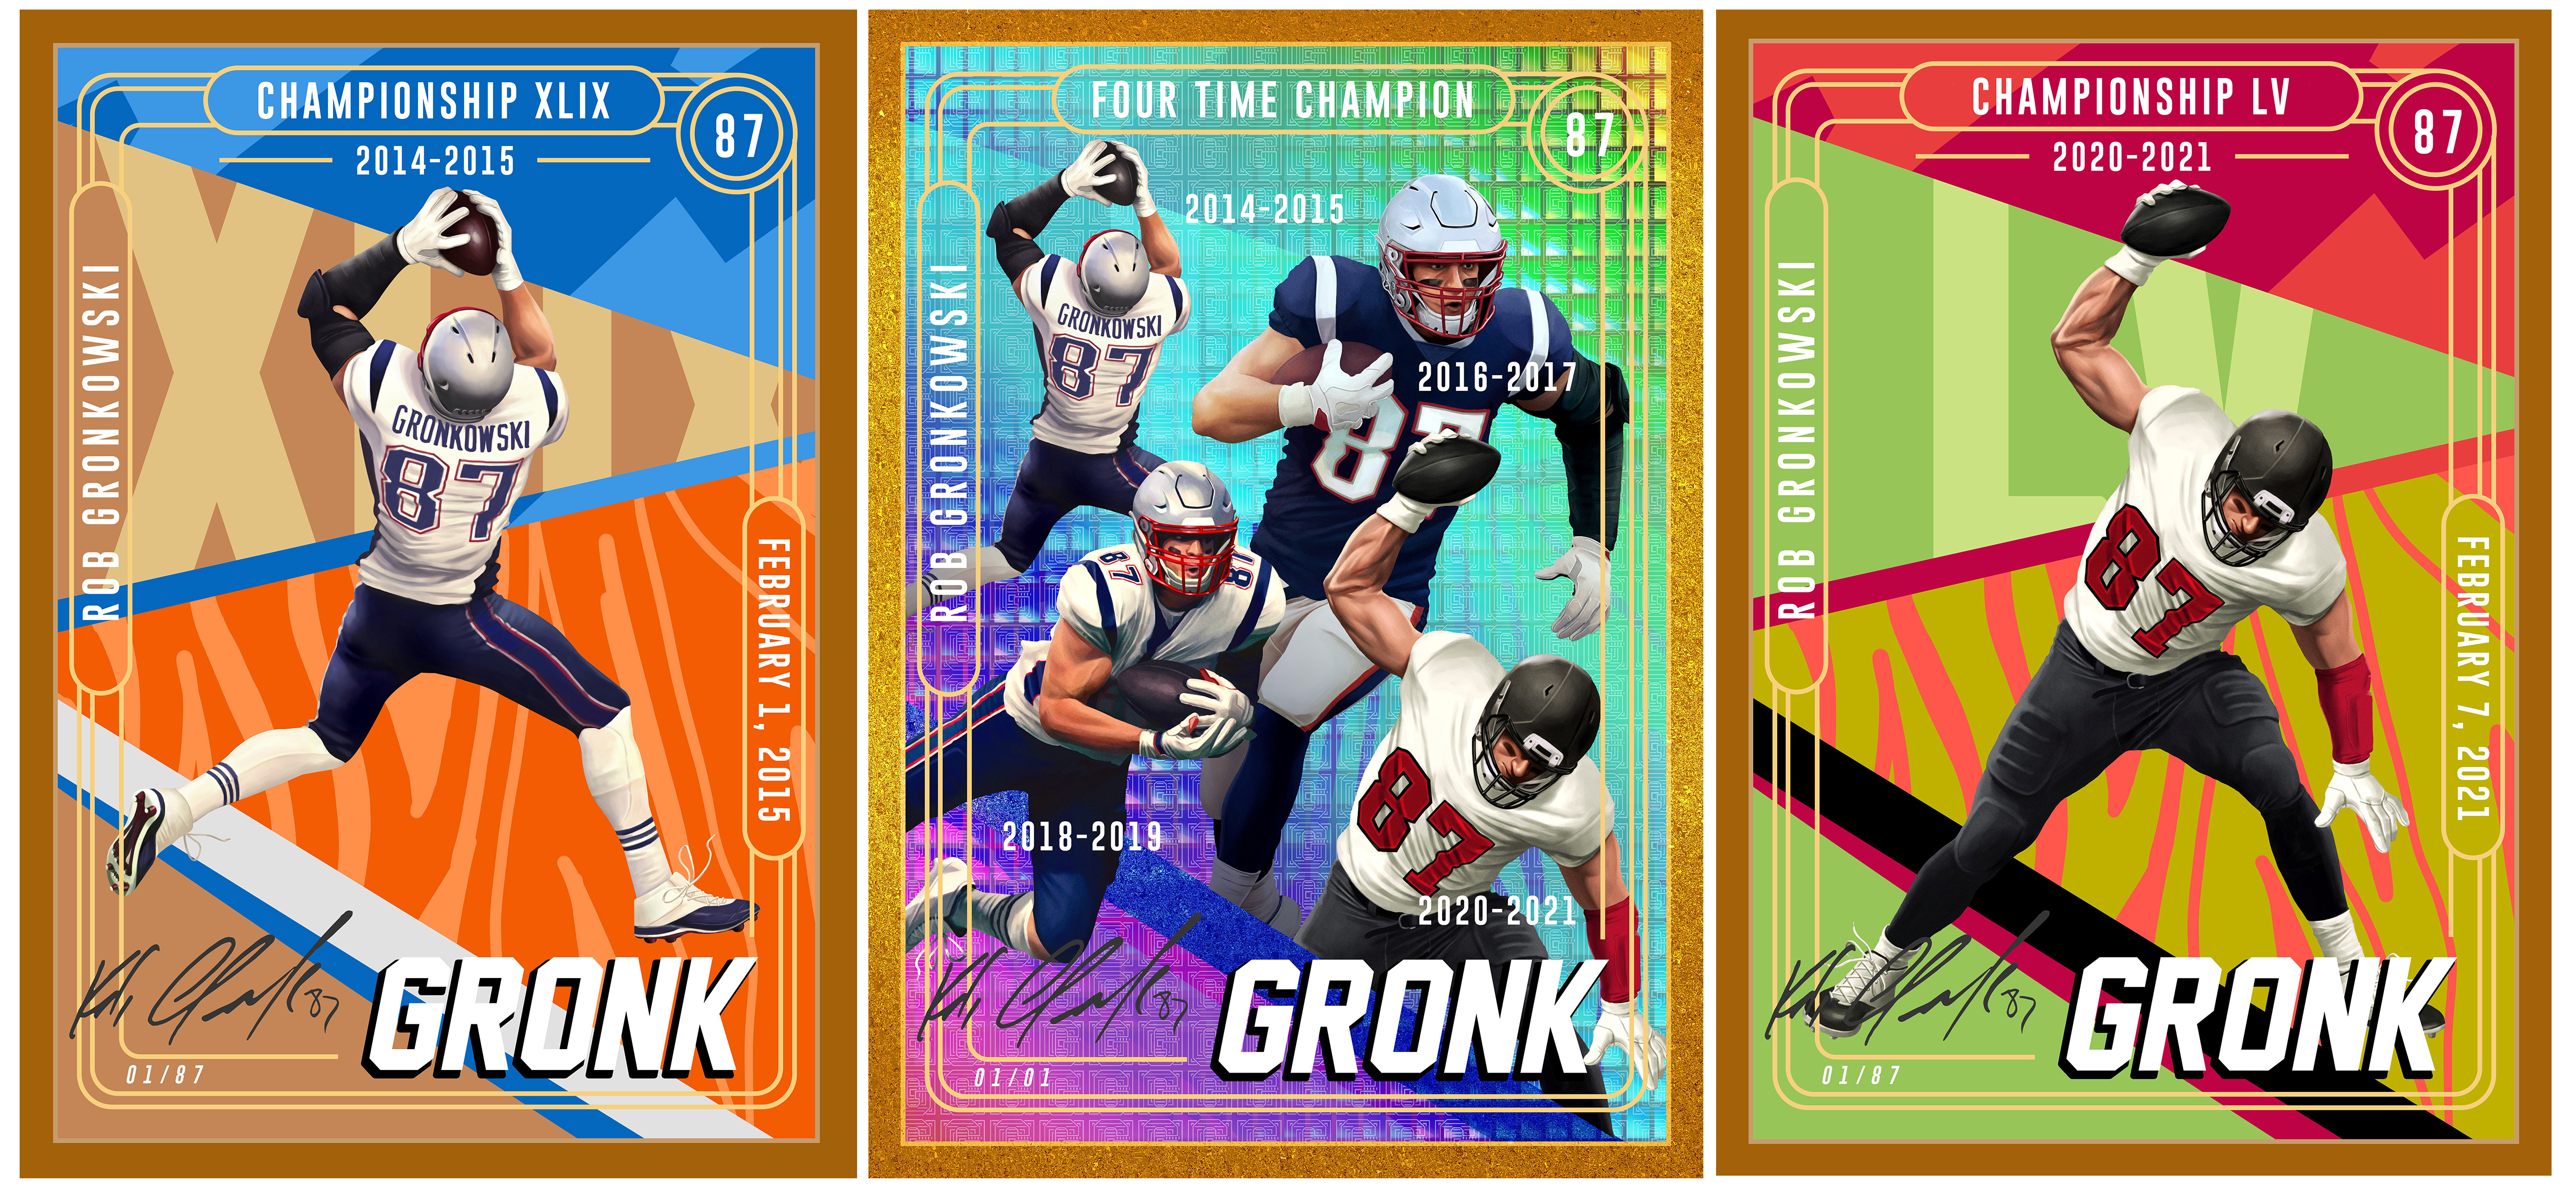 NFL-Gronk brings sports memorabilia into digital age with NFT